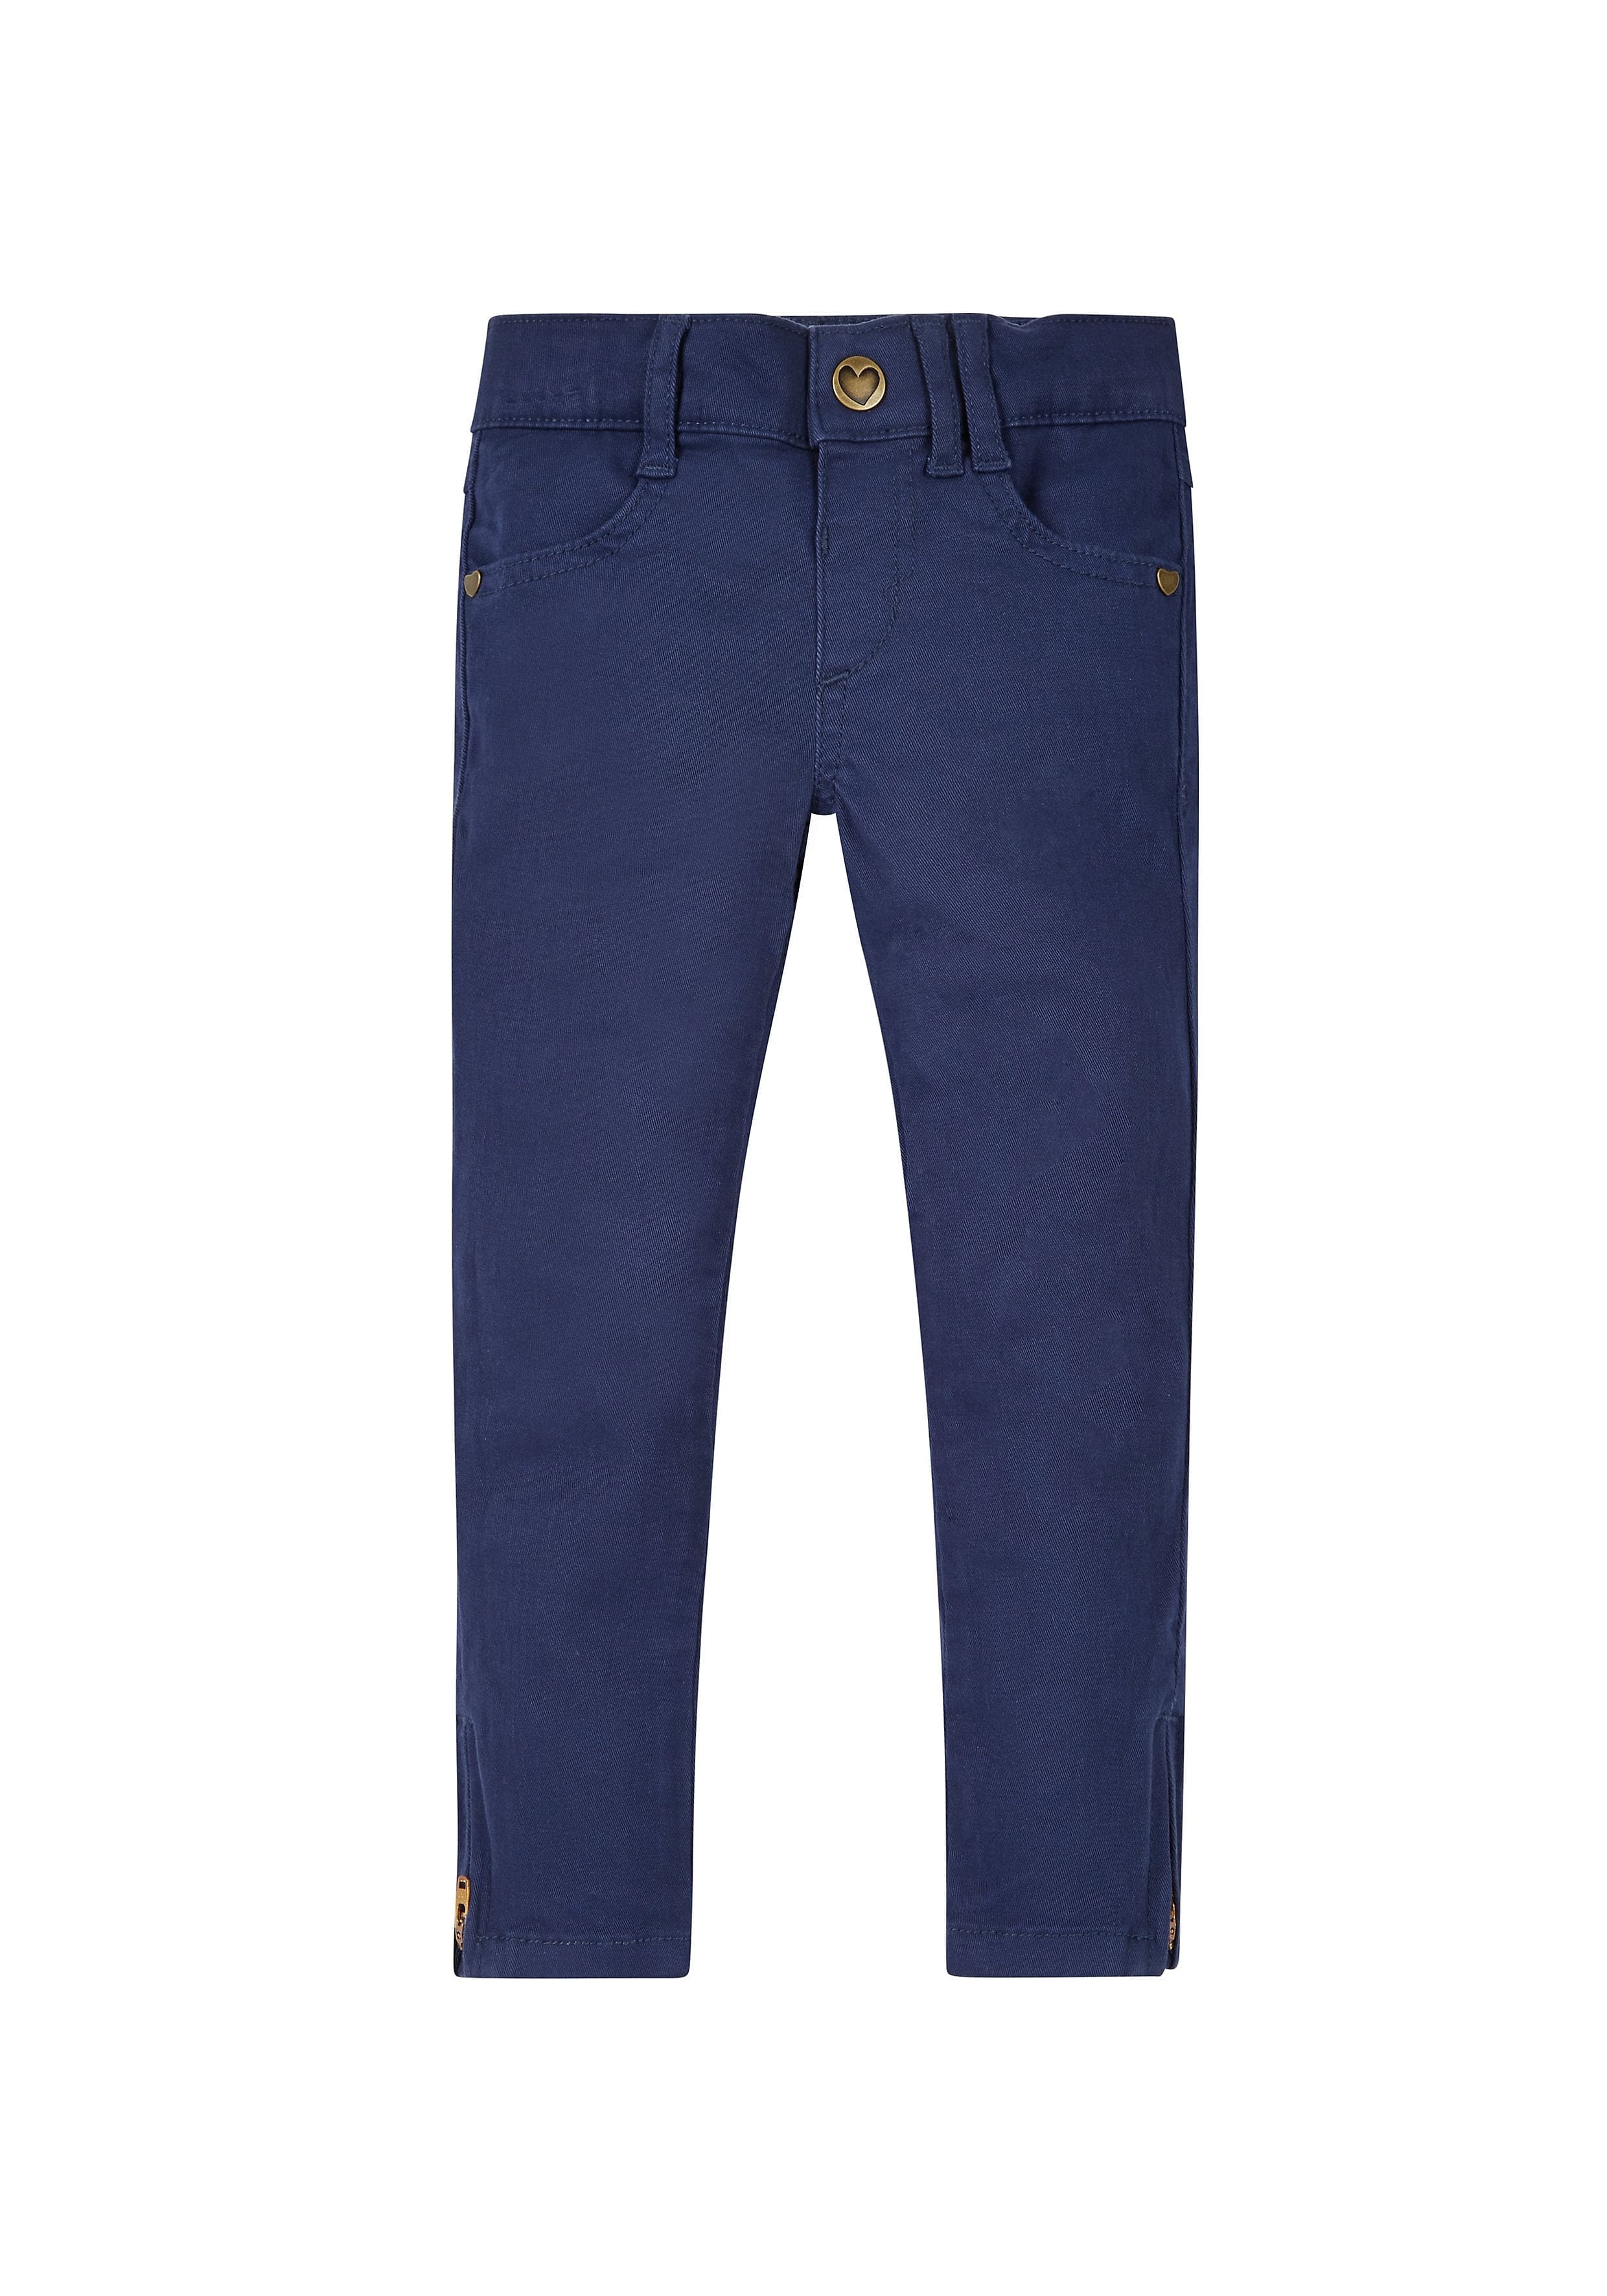 Mothercare | Girls Twill Trousers - Navy 0